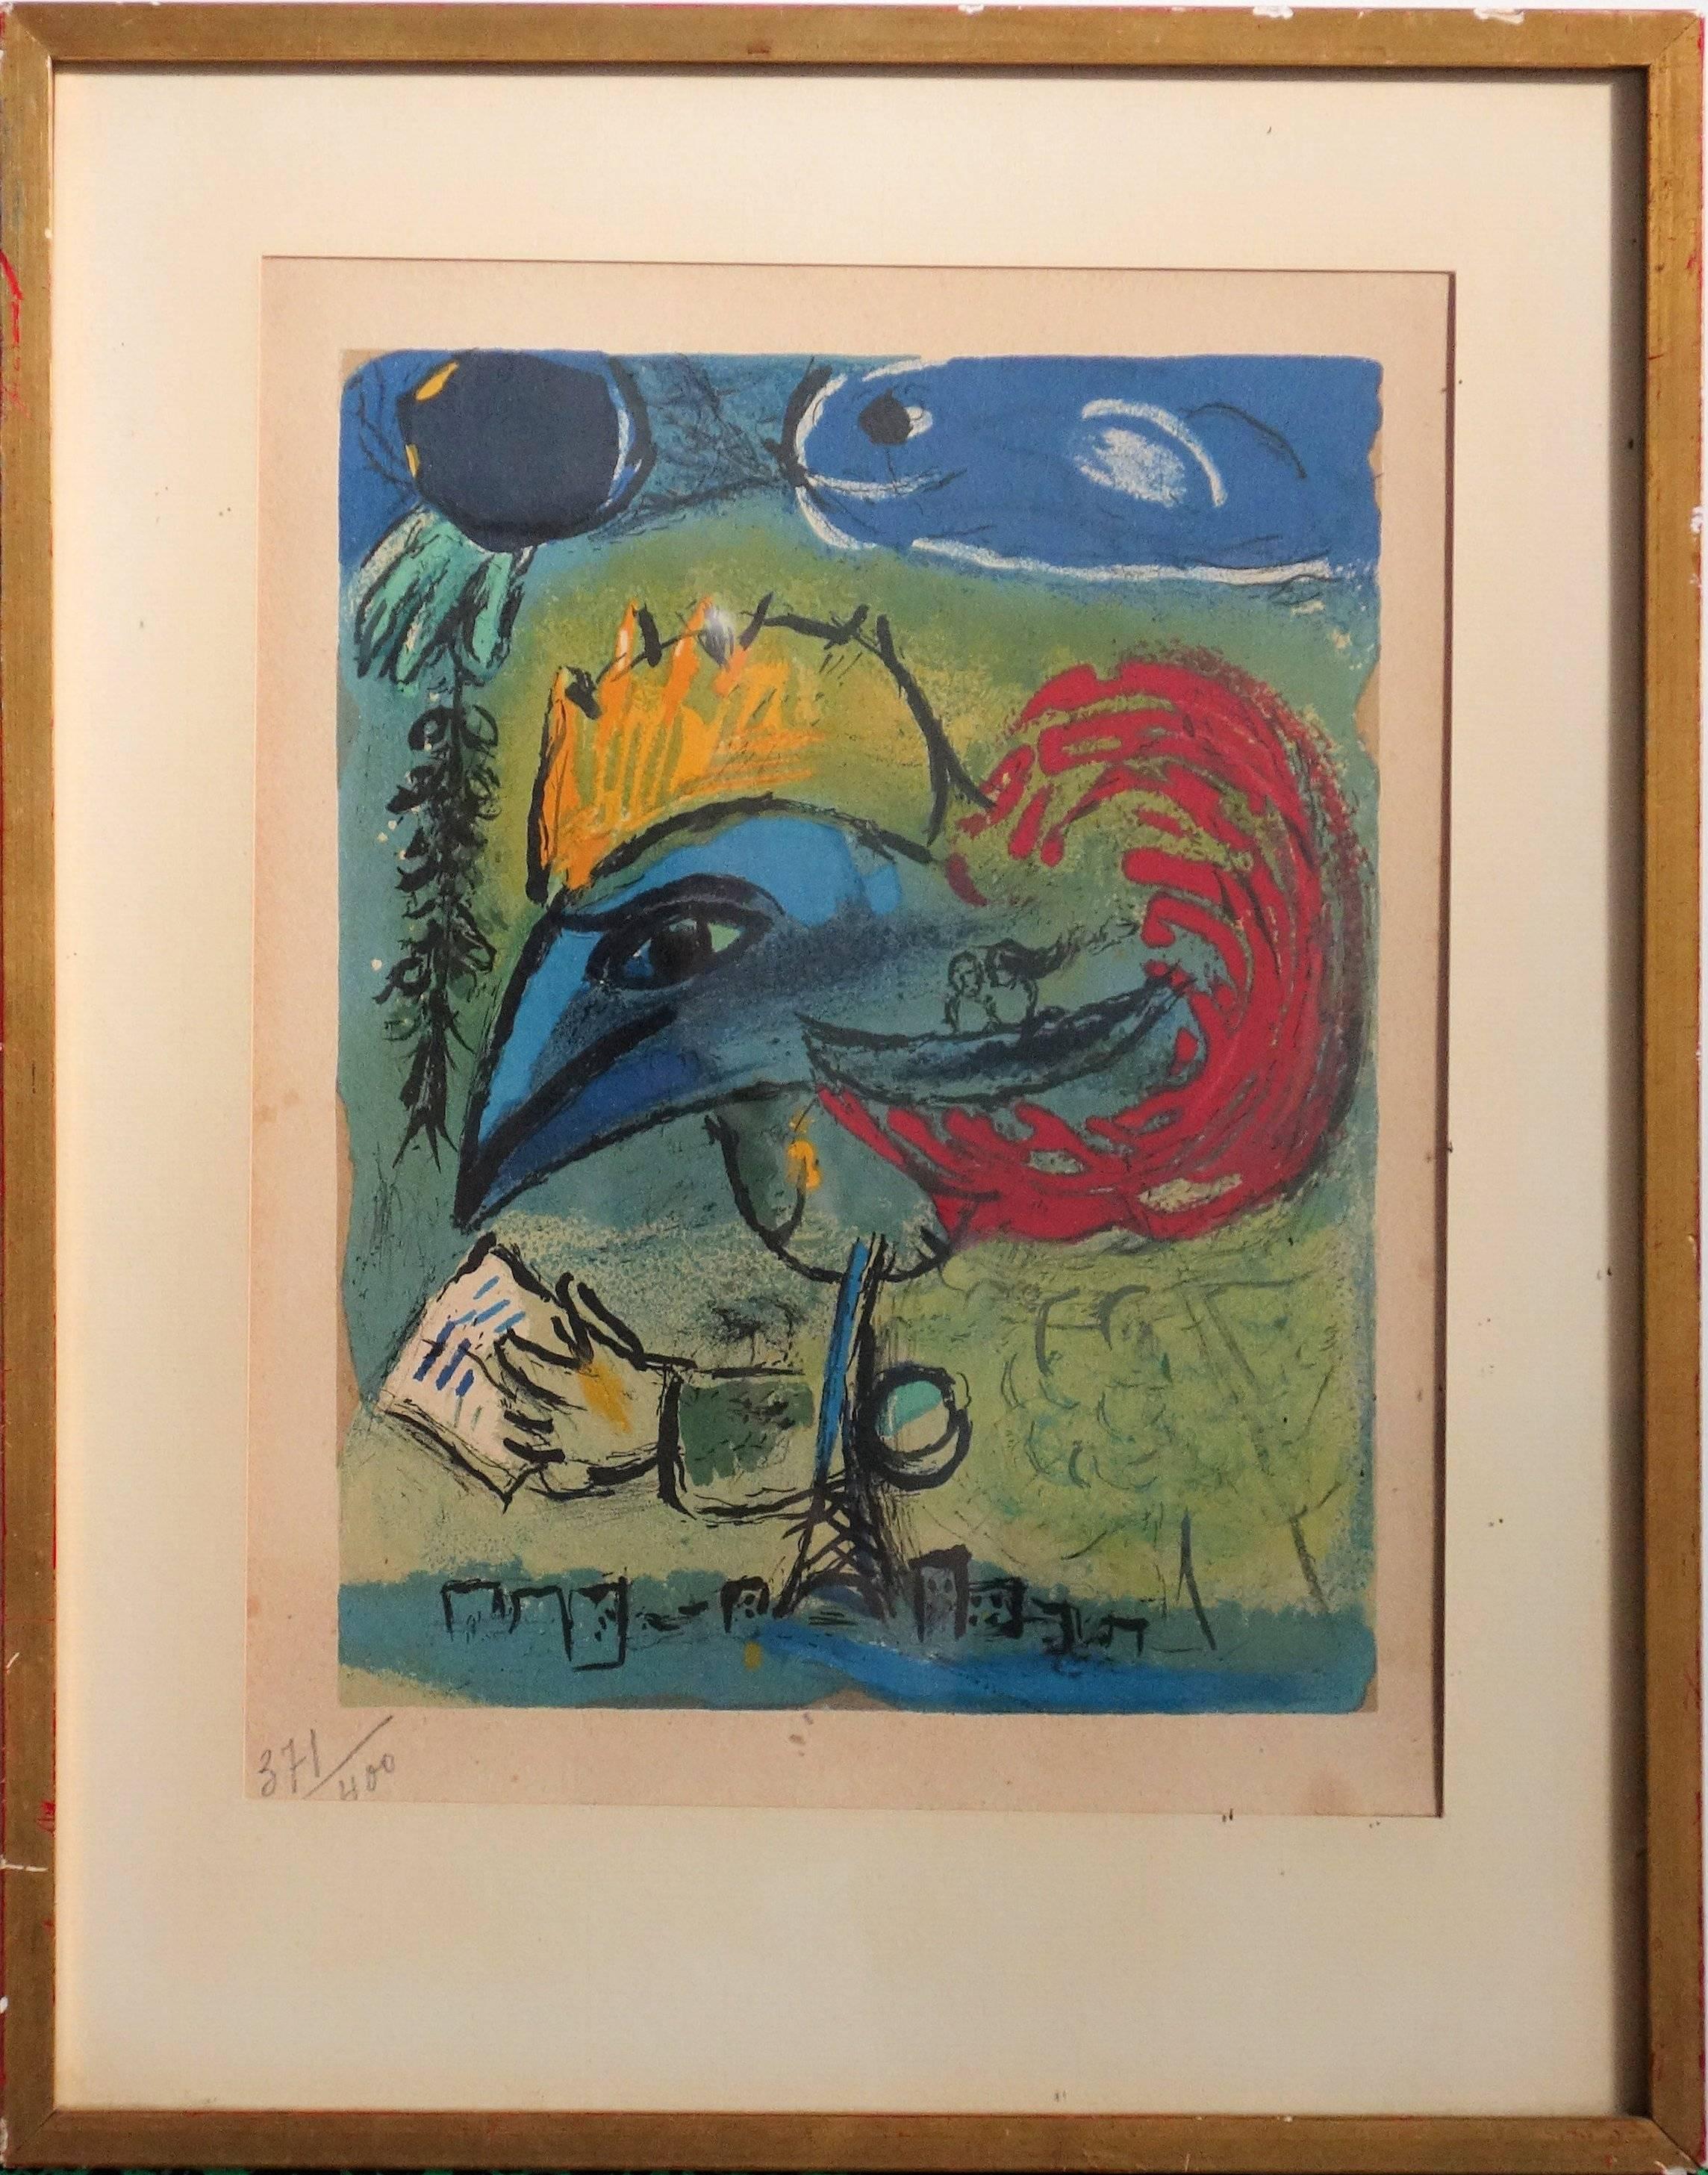 (after) Marc Chagall Figurative Print - Rooster with the Eiffel Tower - Lithograph - 400 ex - 1952